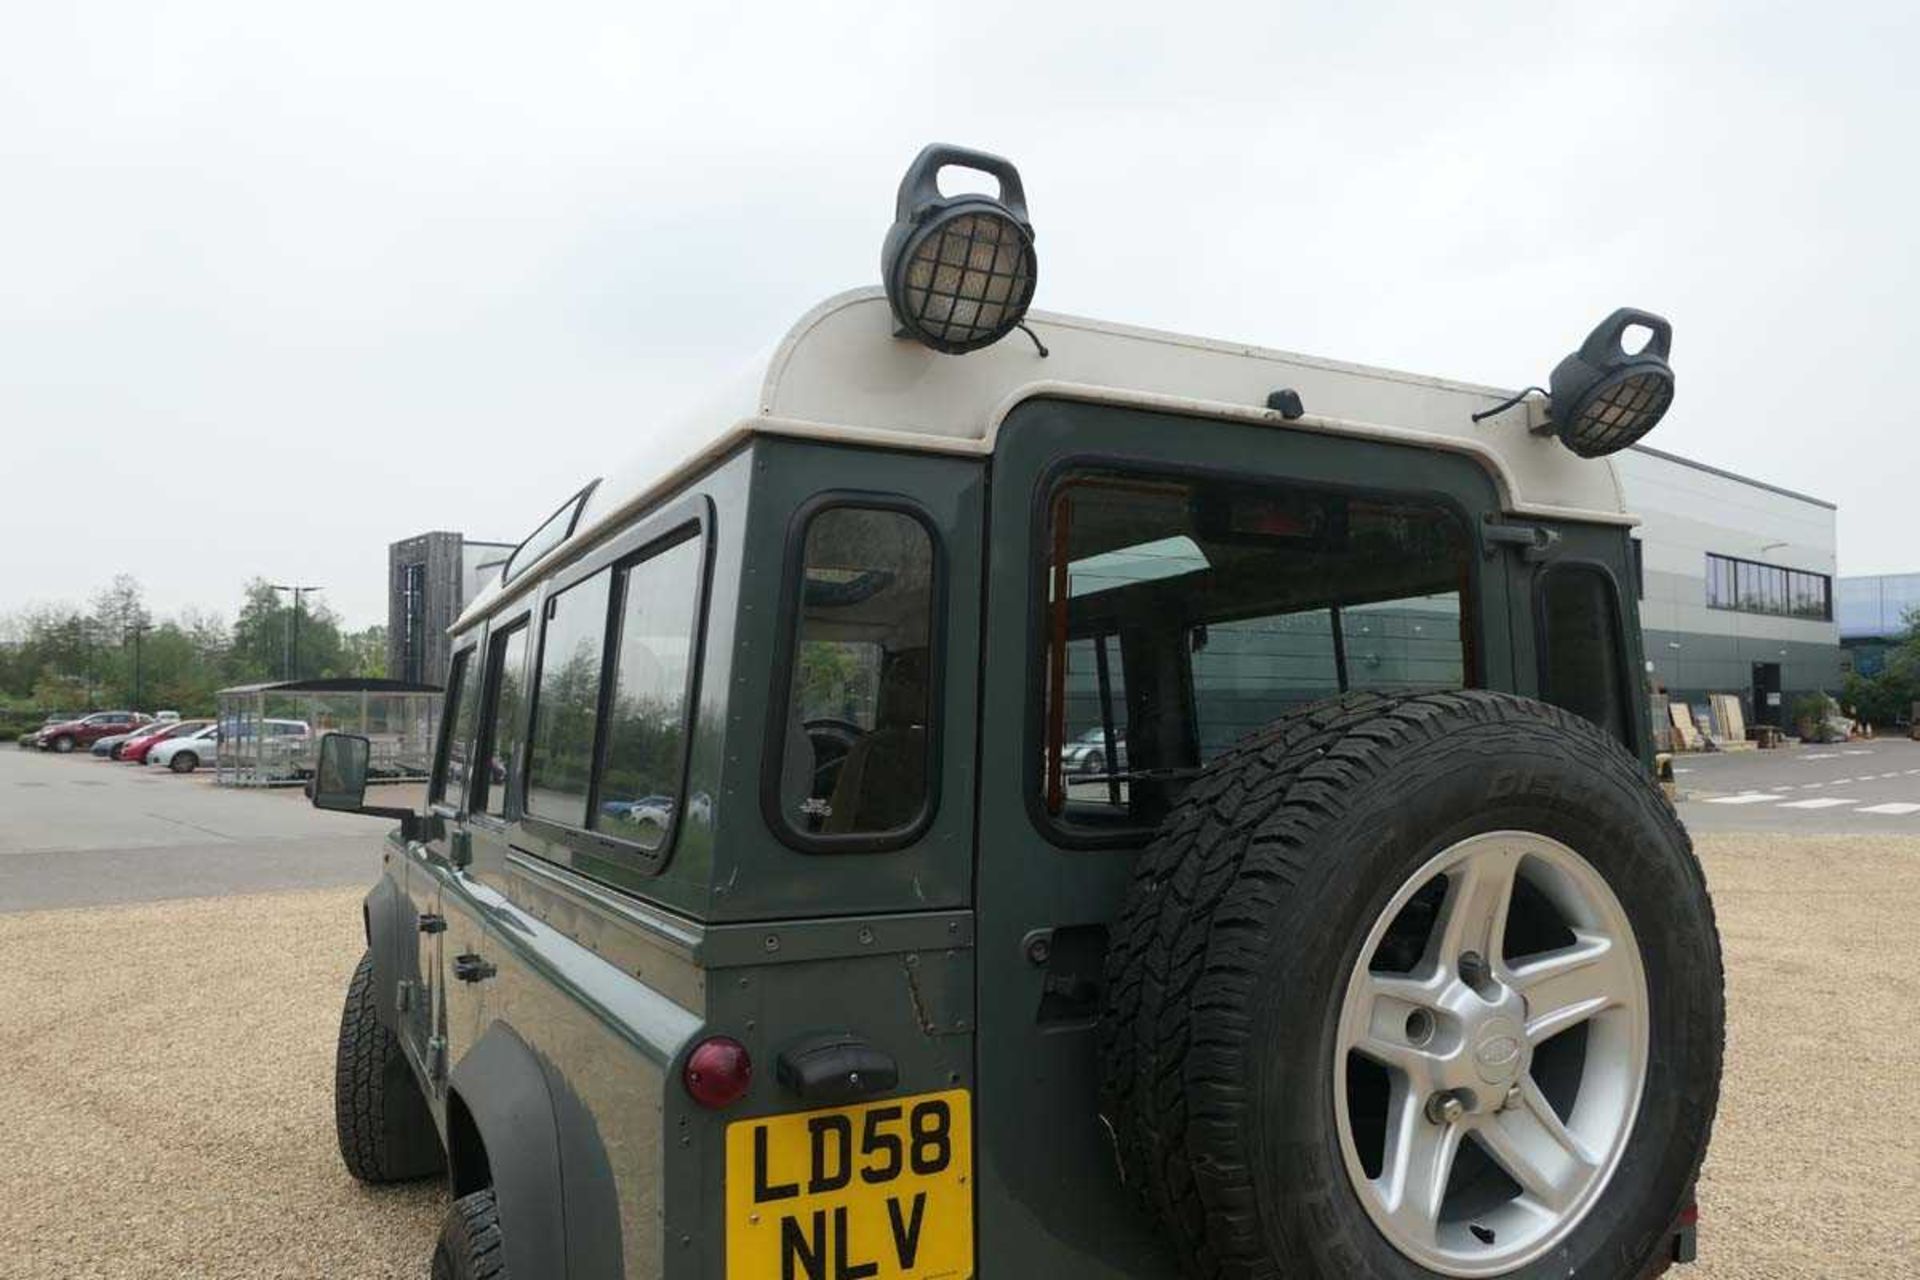 (LD58 NLV) 2008 Land Rover Defender 110 LWB station wagon estate in green, 2402cc diesel, 6-speed - Image 12 of 20